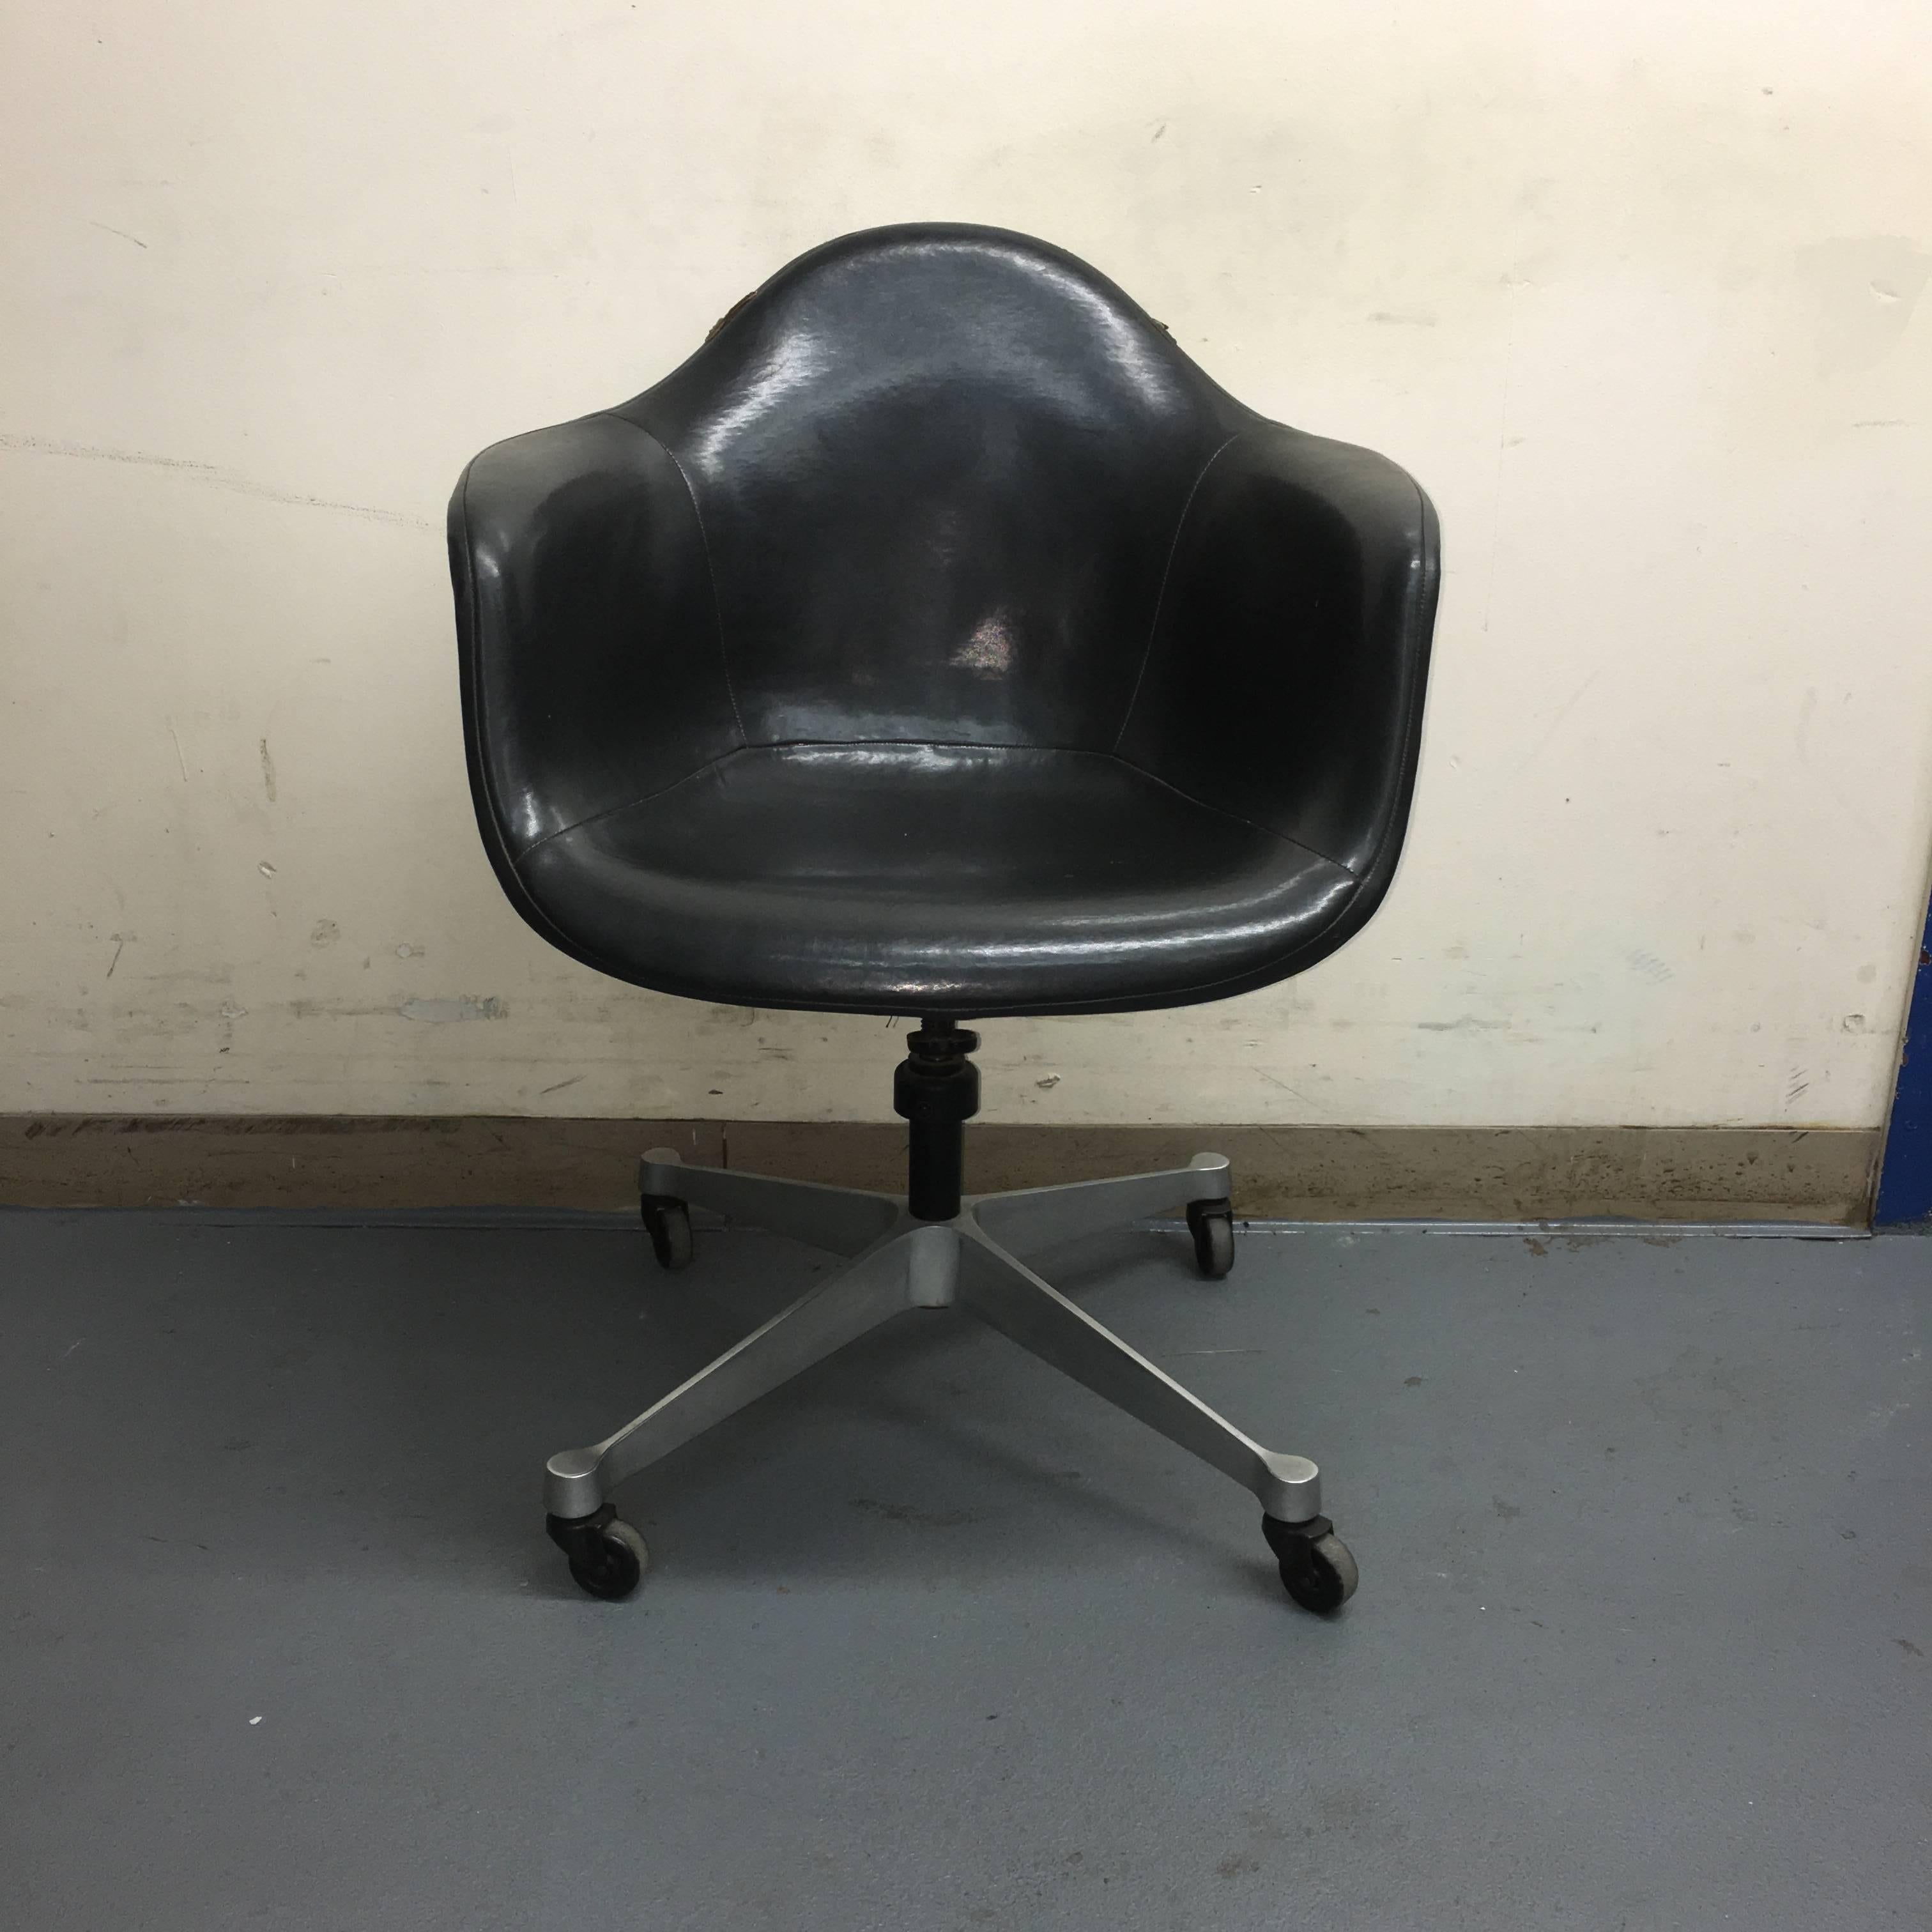 Eames for Herman Miller DAT-1 swivel desk chair. Aluminum base has all four casters in working condition. Removable Naugahyde cover in very good condition with only two minor wear spots along rail, but to splits in seams or burns etc. Tilt swivel